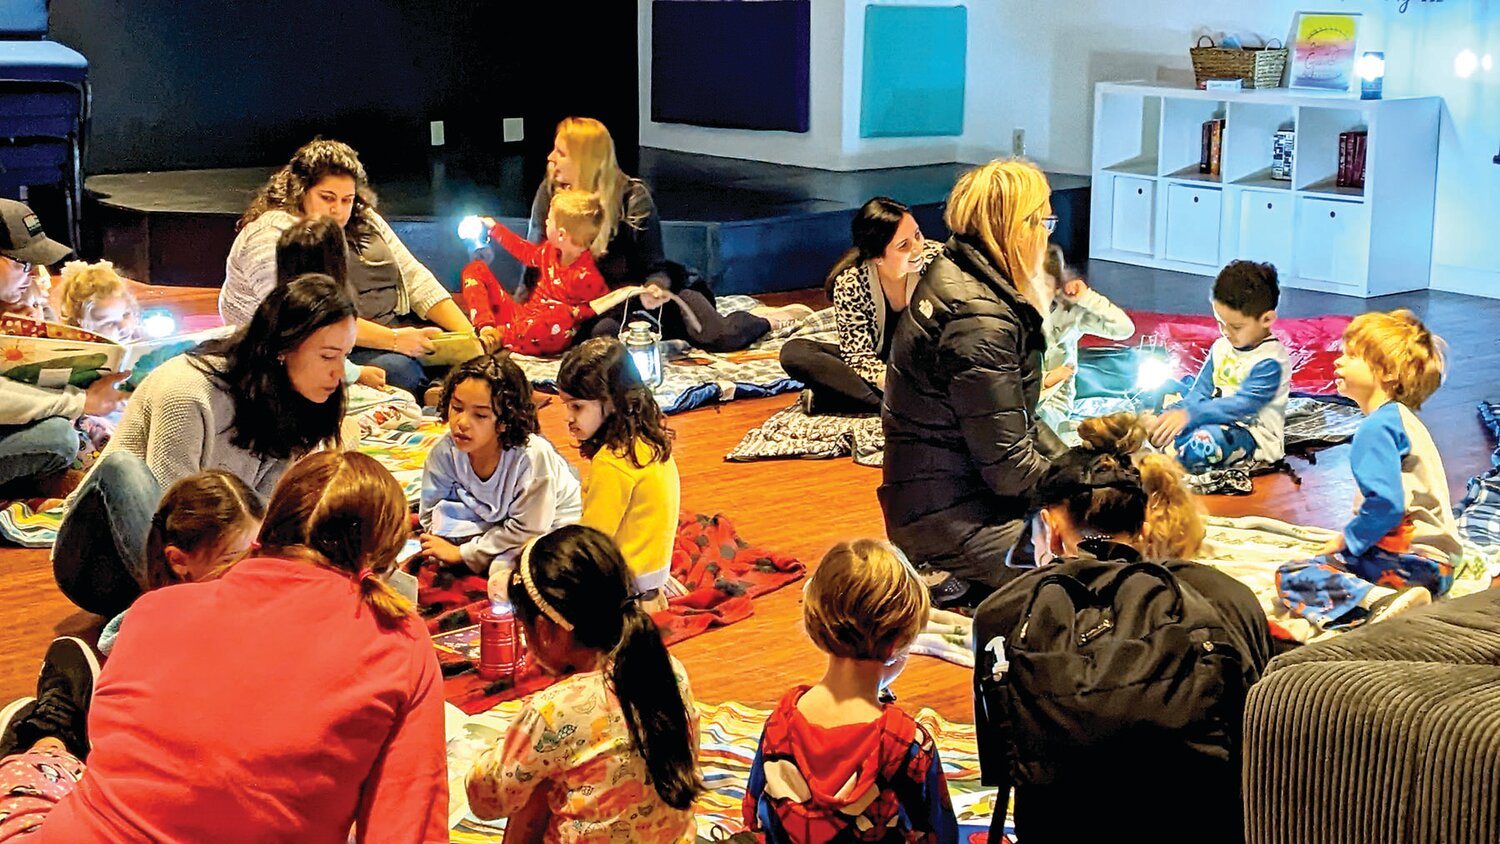 For Read Across America Week, Woodside Christian Preschool in Yardley transformed a room into a campfire setting complete with sleeping bags, lanterns and a virtual campfire. Parents came into the school throughout the morning to read to their child’s class and share their favorite stories.